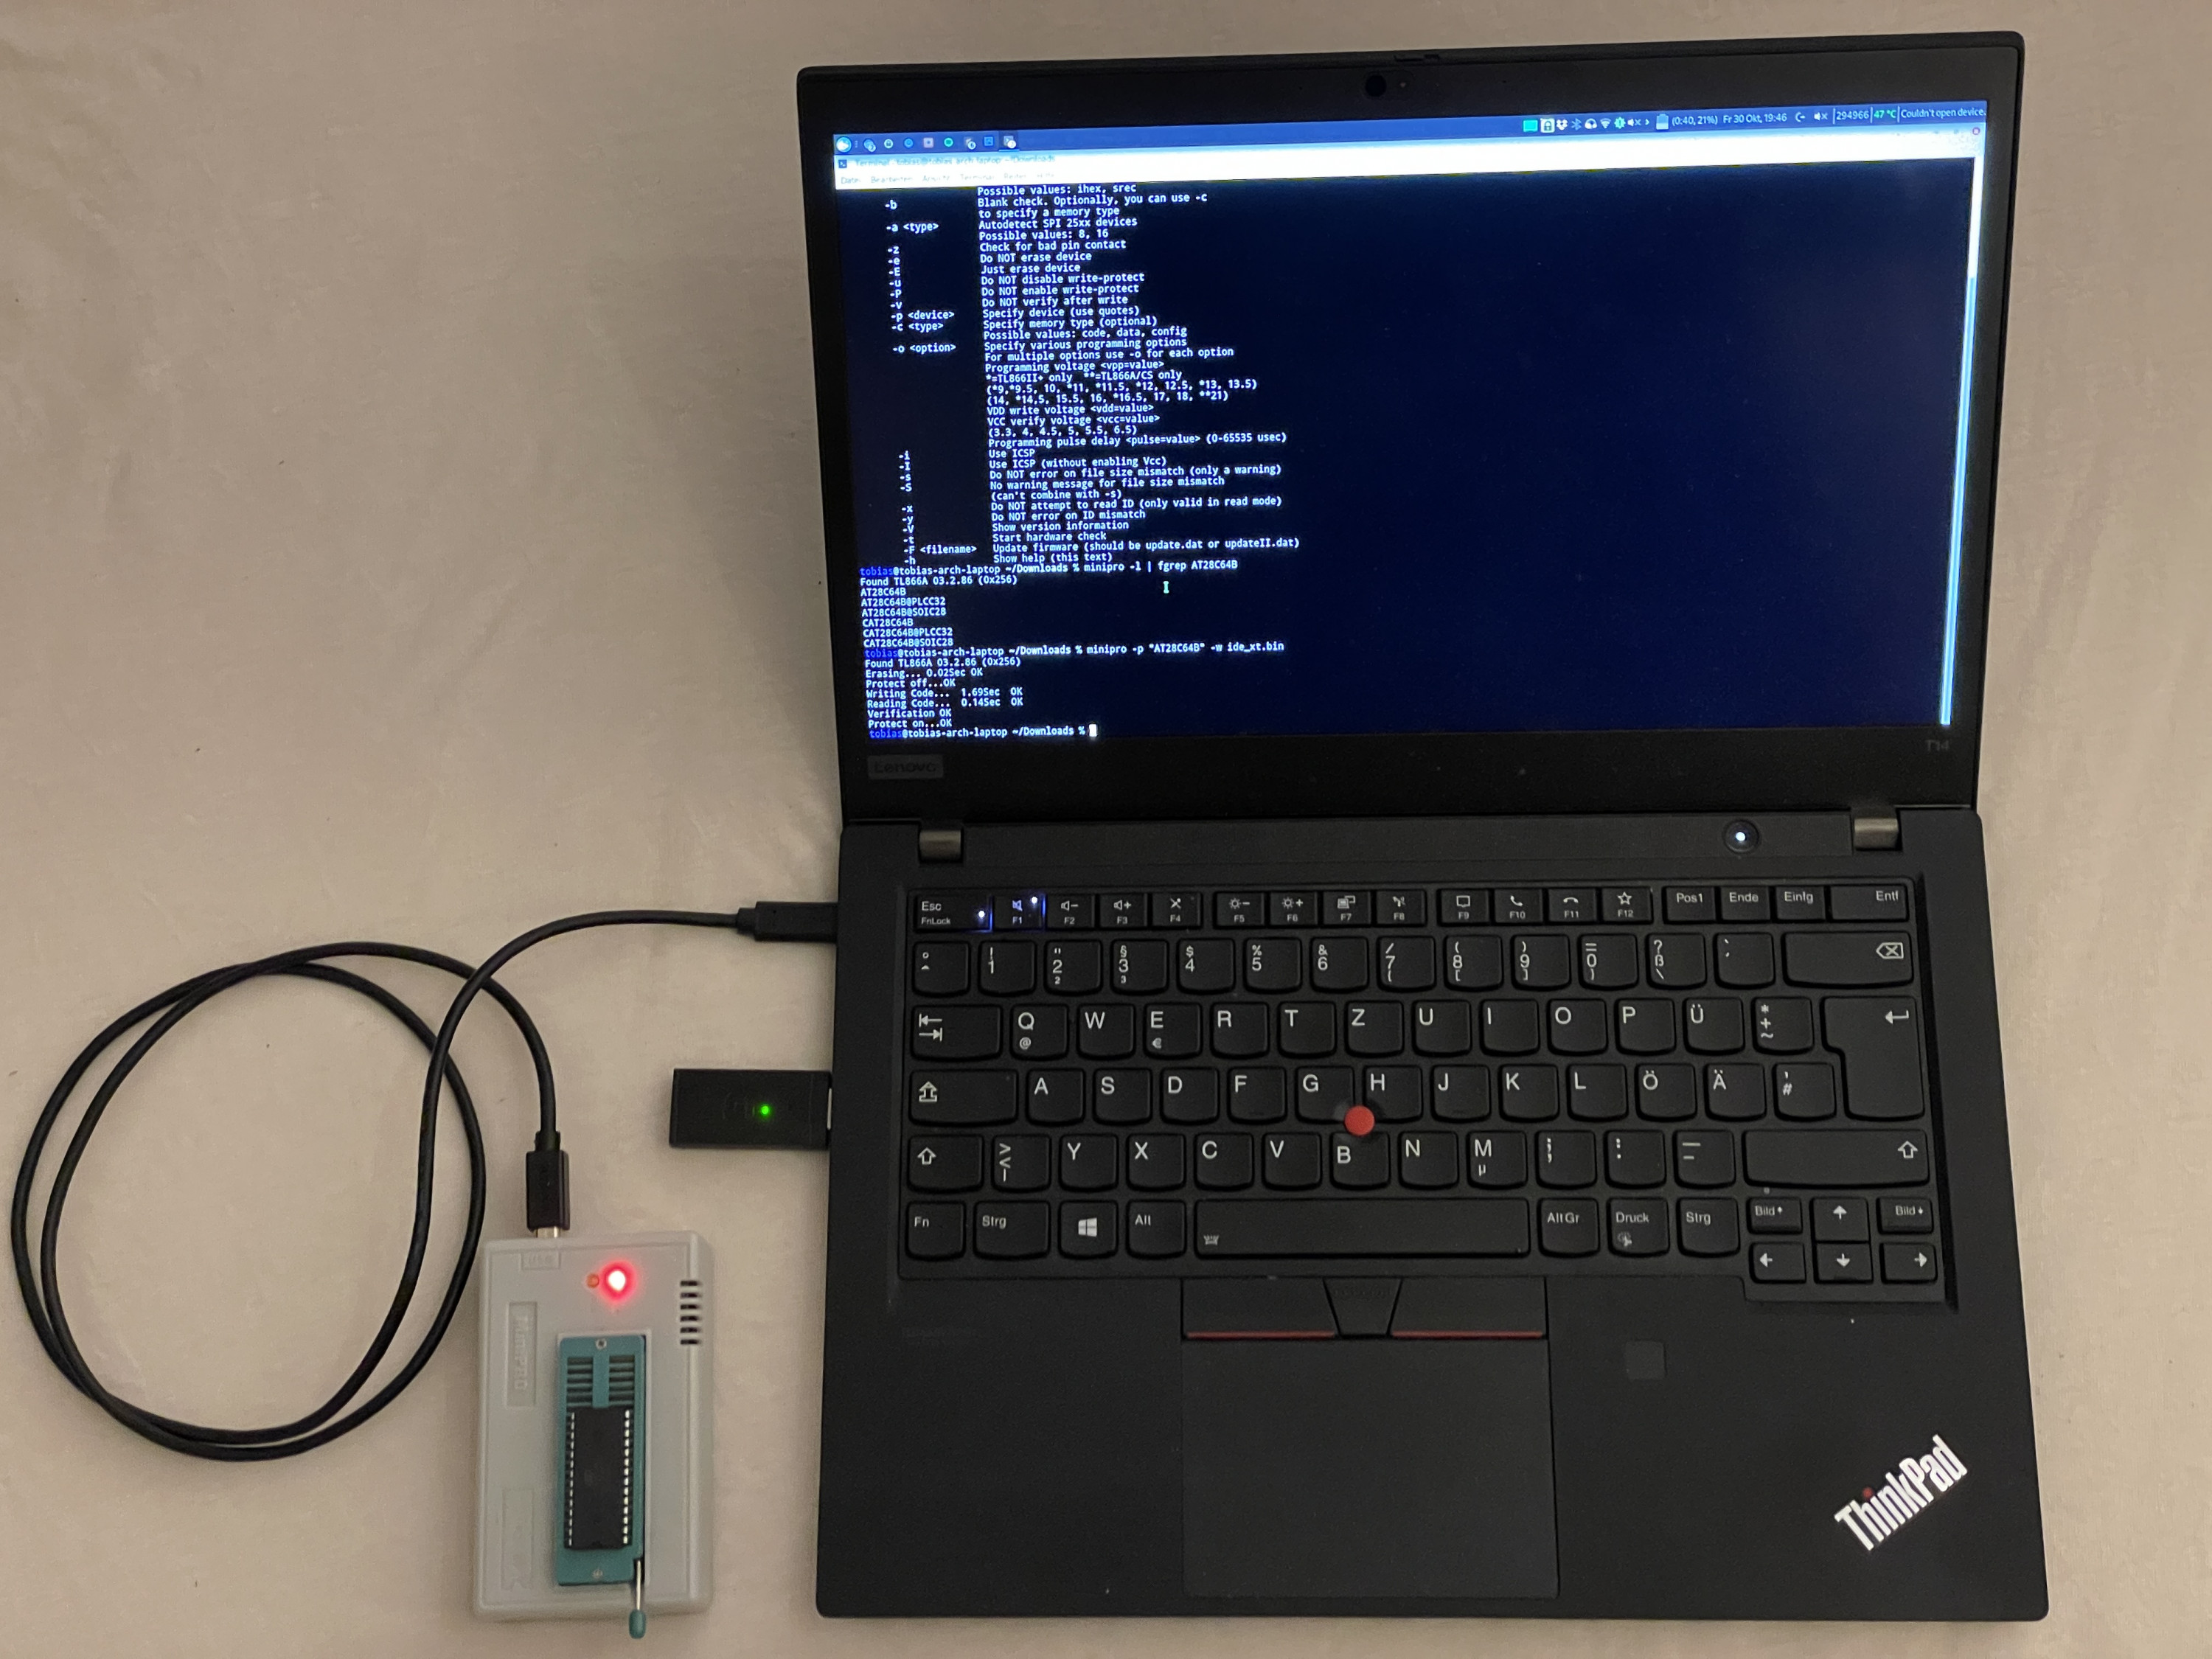 ThinkPad laptop with MiniPro TL866 programmer attached. DIP EEPROM is inserted in the programmer.